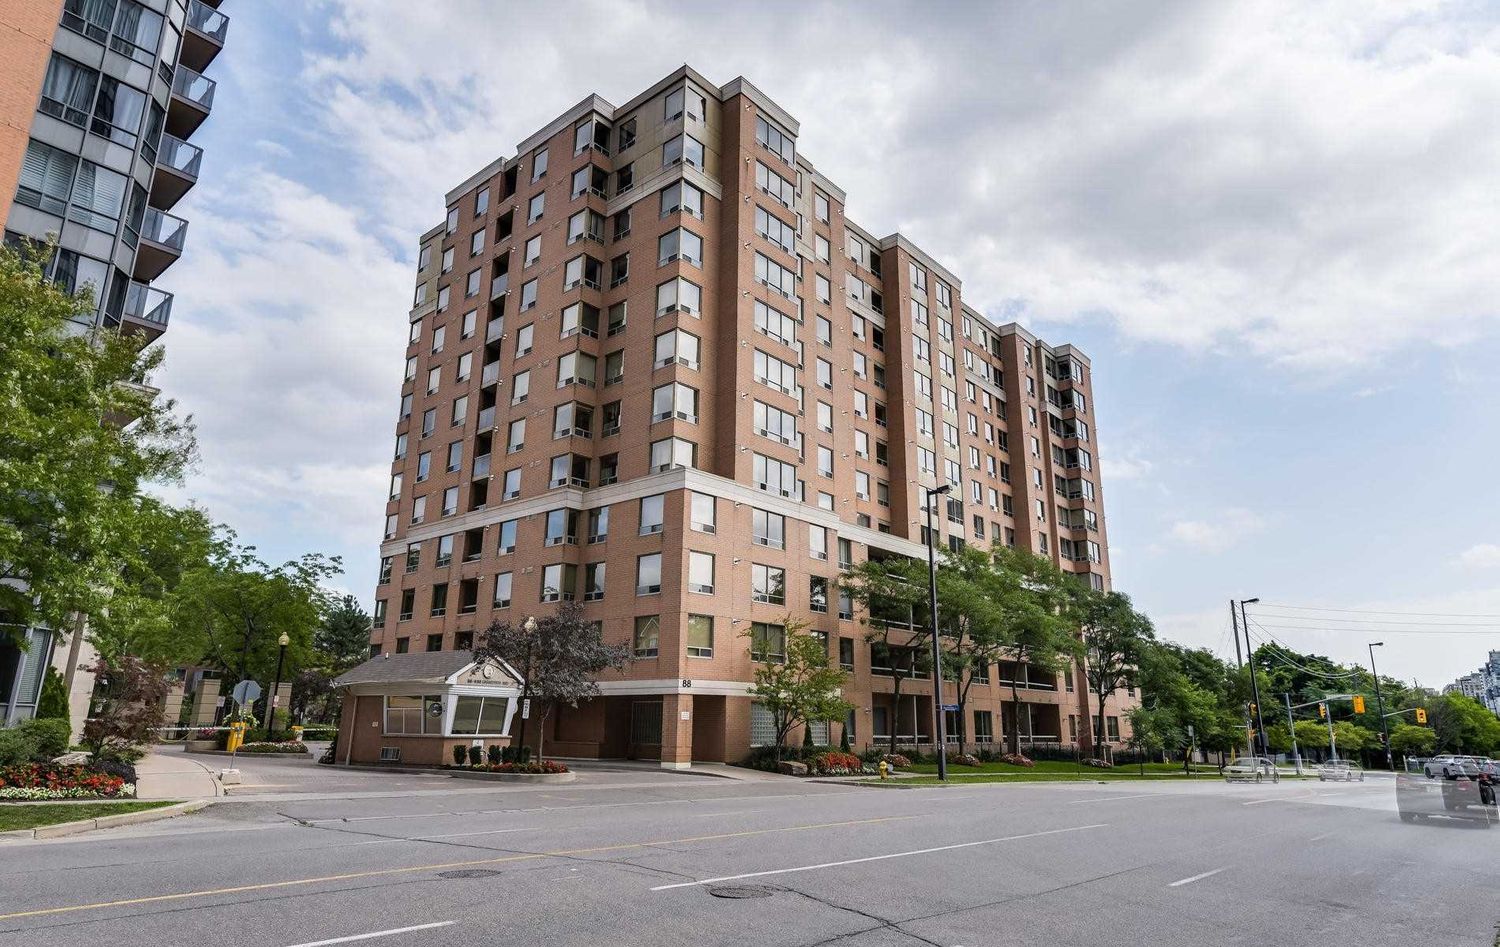 88 Grandview Way. Grandview at Northtown Condos is located in  North York, Toronto - image #2 of 2